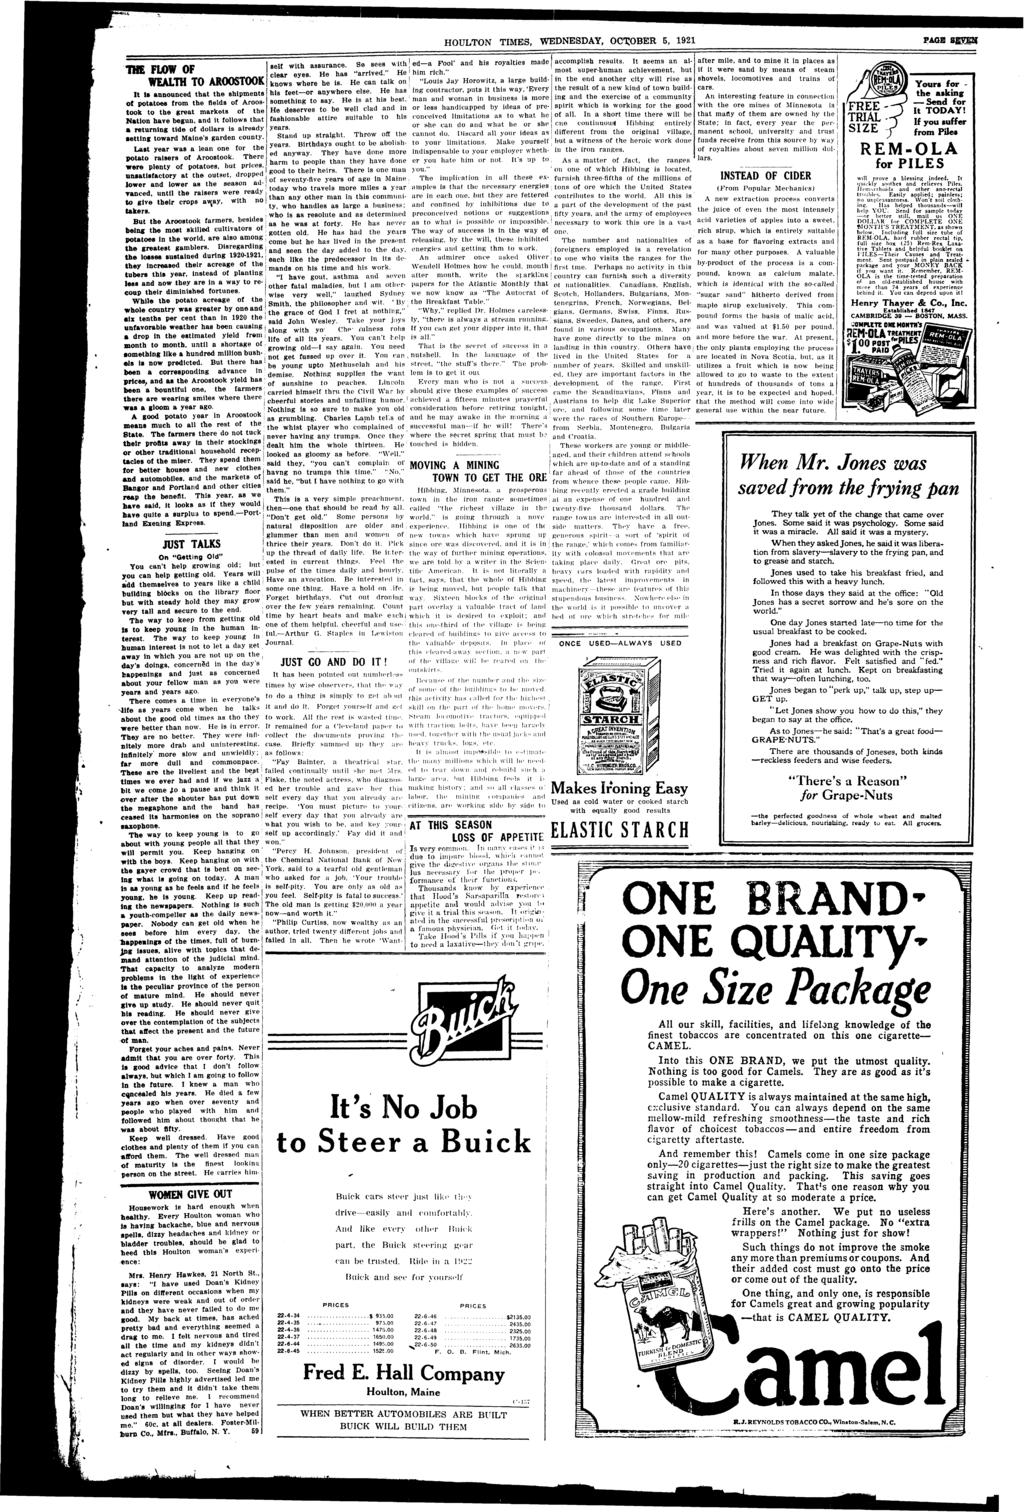 HOULTON TIMES, WEDNESDAY, OCTOBER 5, 1921 PAGE SfVEN self wth assurance. Se sees wth ed a Fool and hs royaltes made accomplsh results.